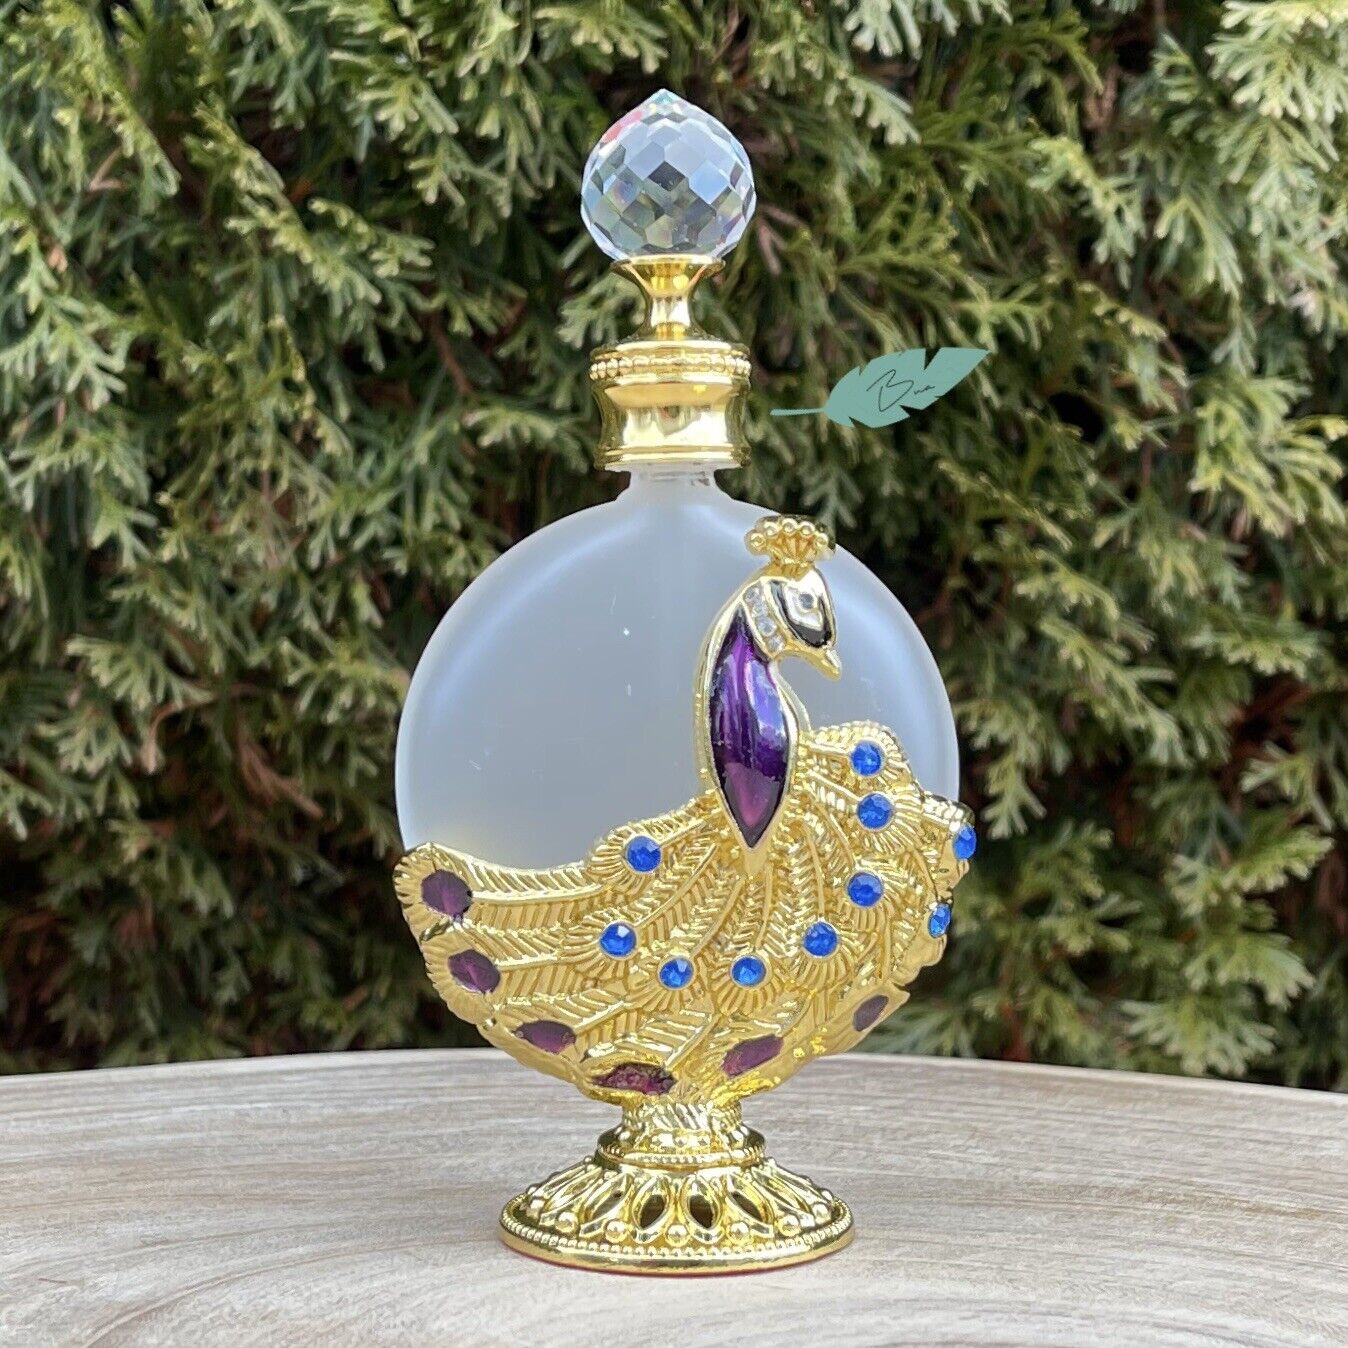 Peacock Feather Vintage-Style Perfume Bottle 30mL In Royal Gold